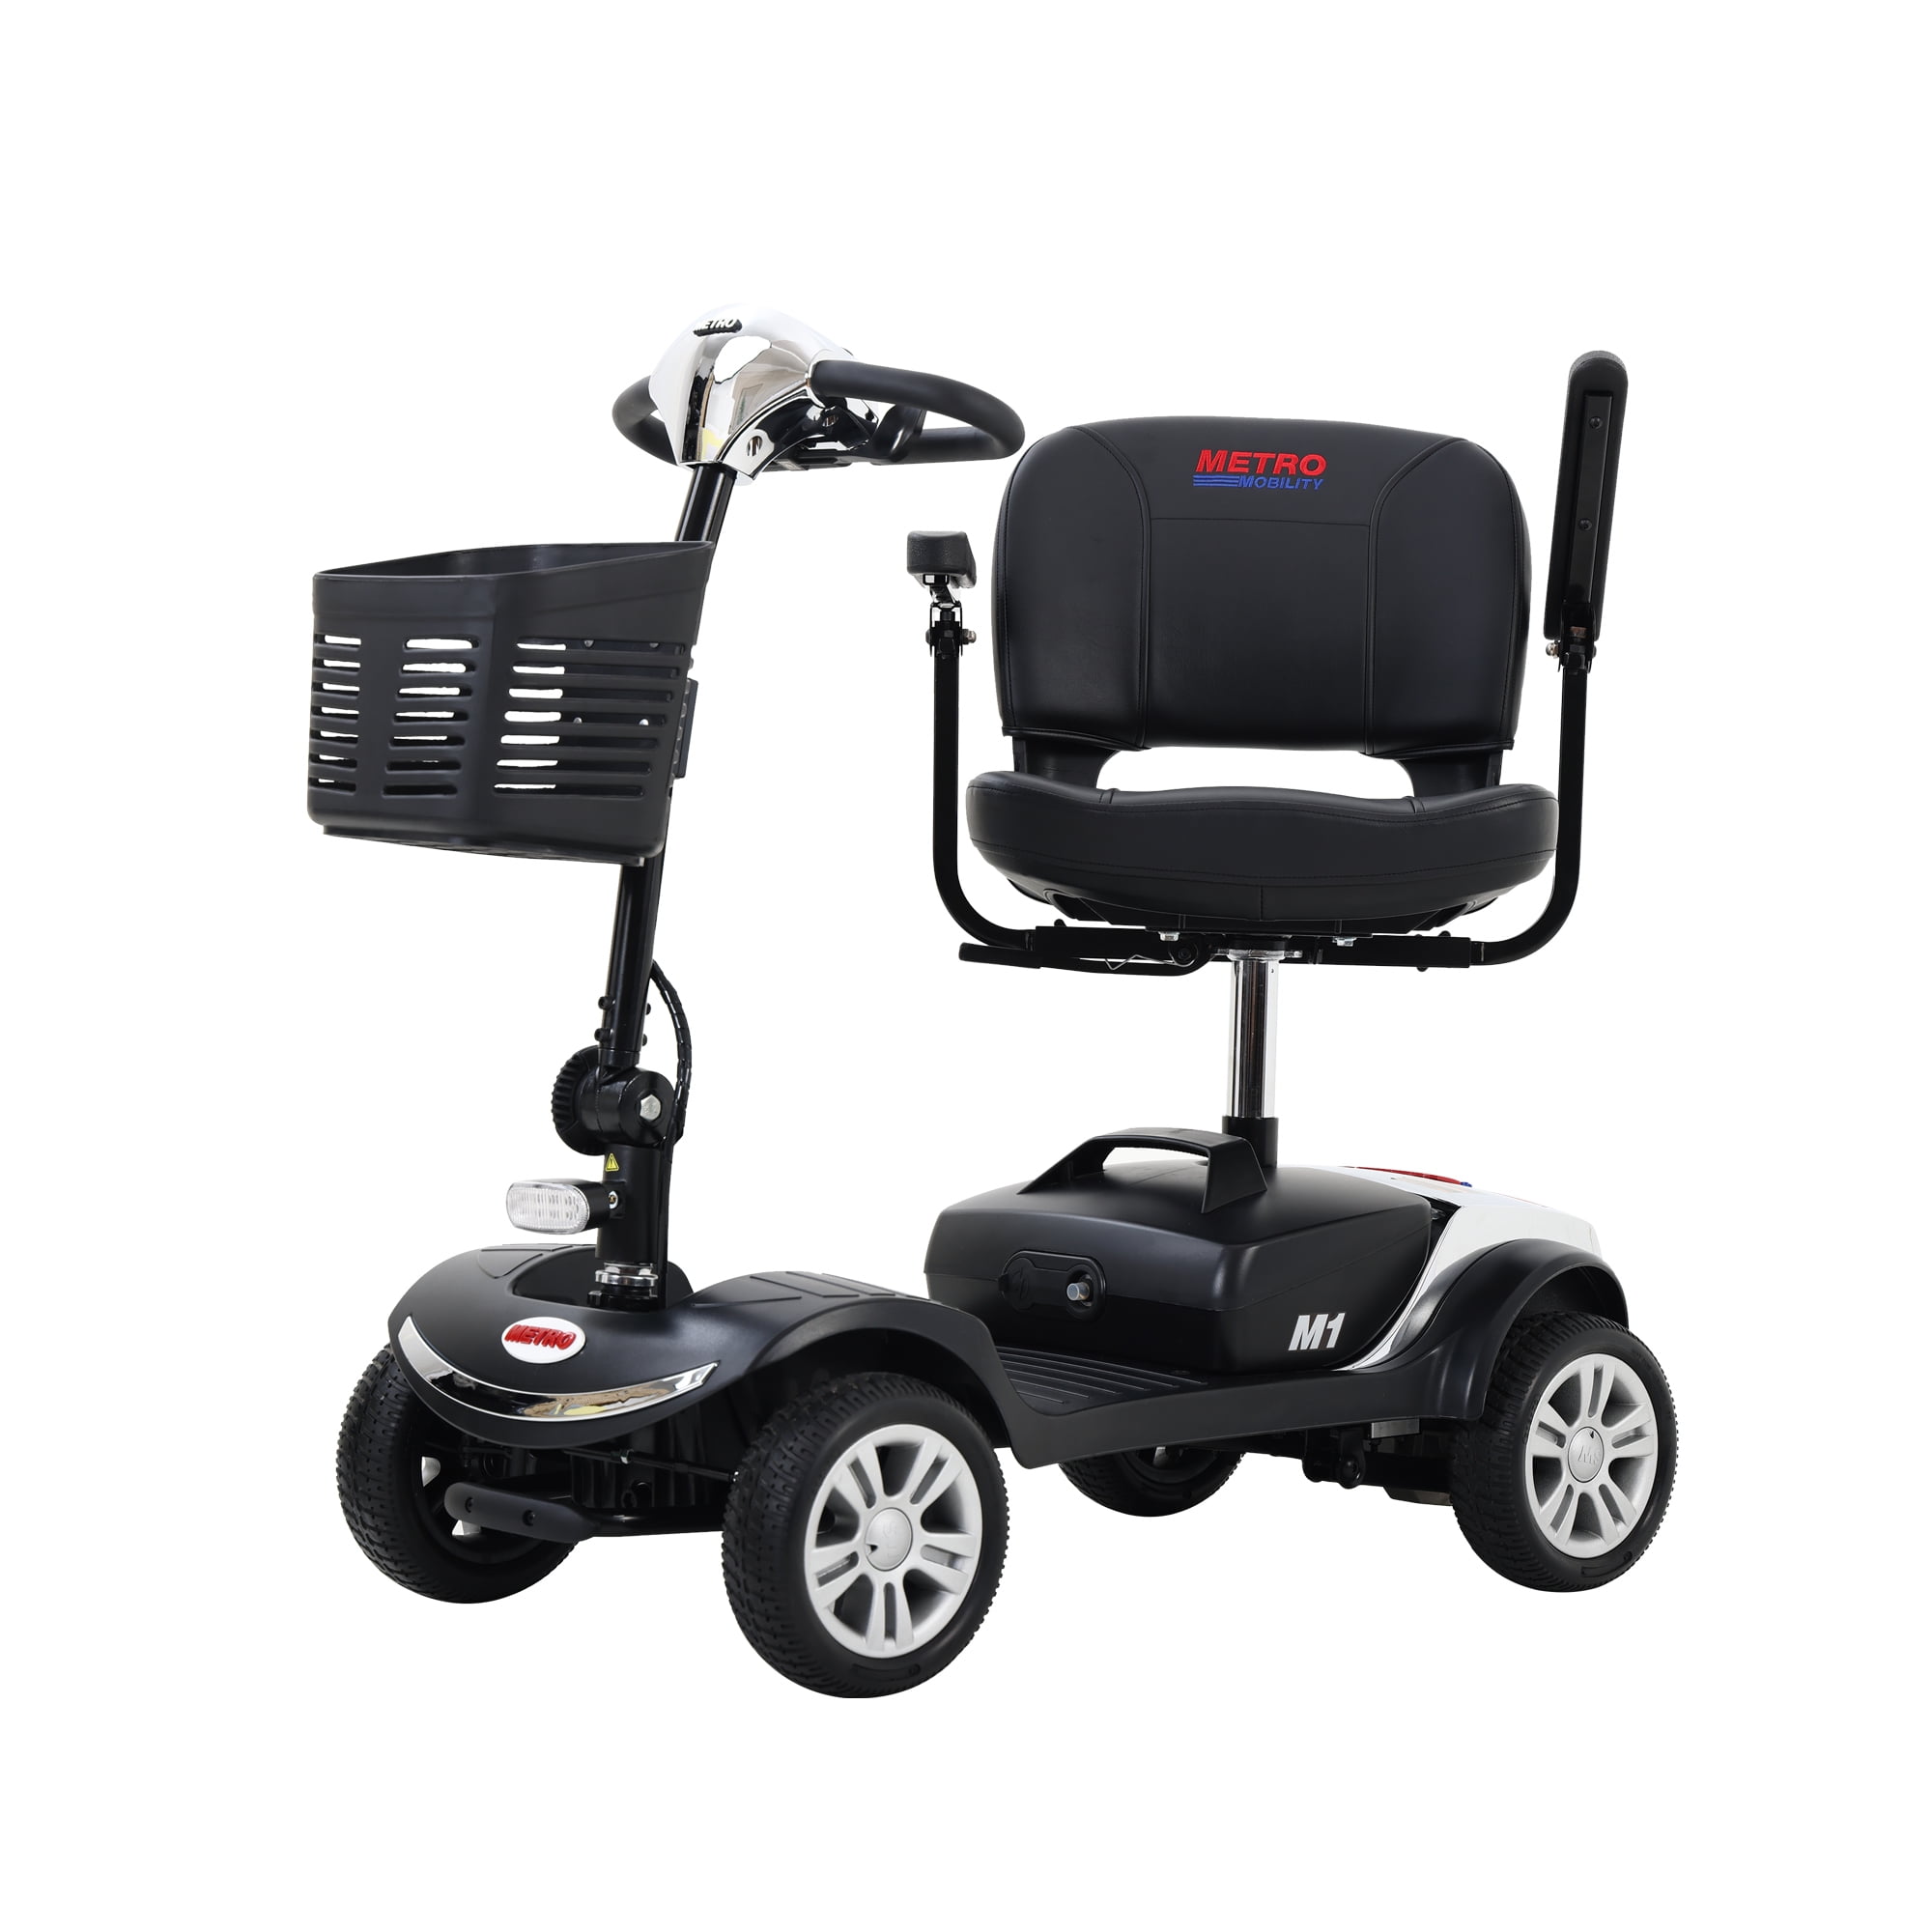 SEGMART Outdoor Mobility Scooters for Senior, 4 Wheel Mobility Scooter with Front & Rear LED Light, Motorized Electric Medical Carts for Adults, 10 Miles, 265lbs, Chrome, SS1796